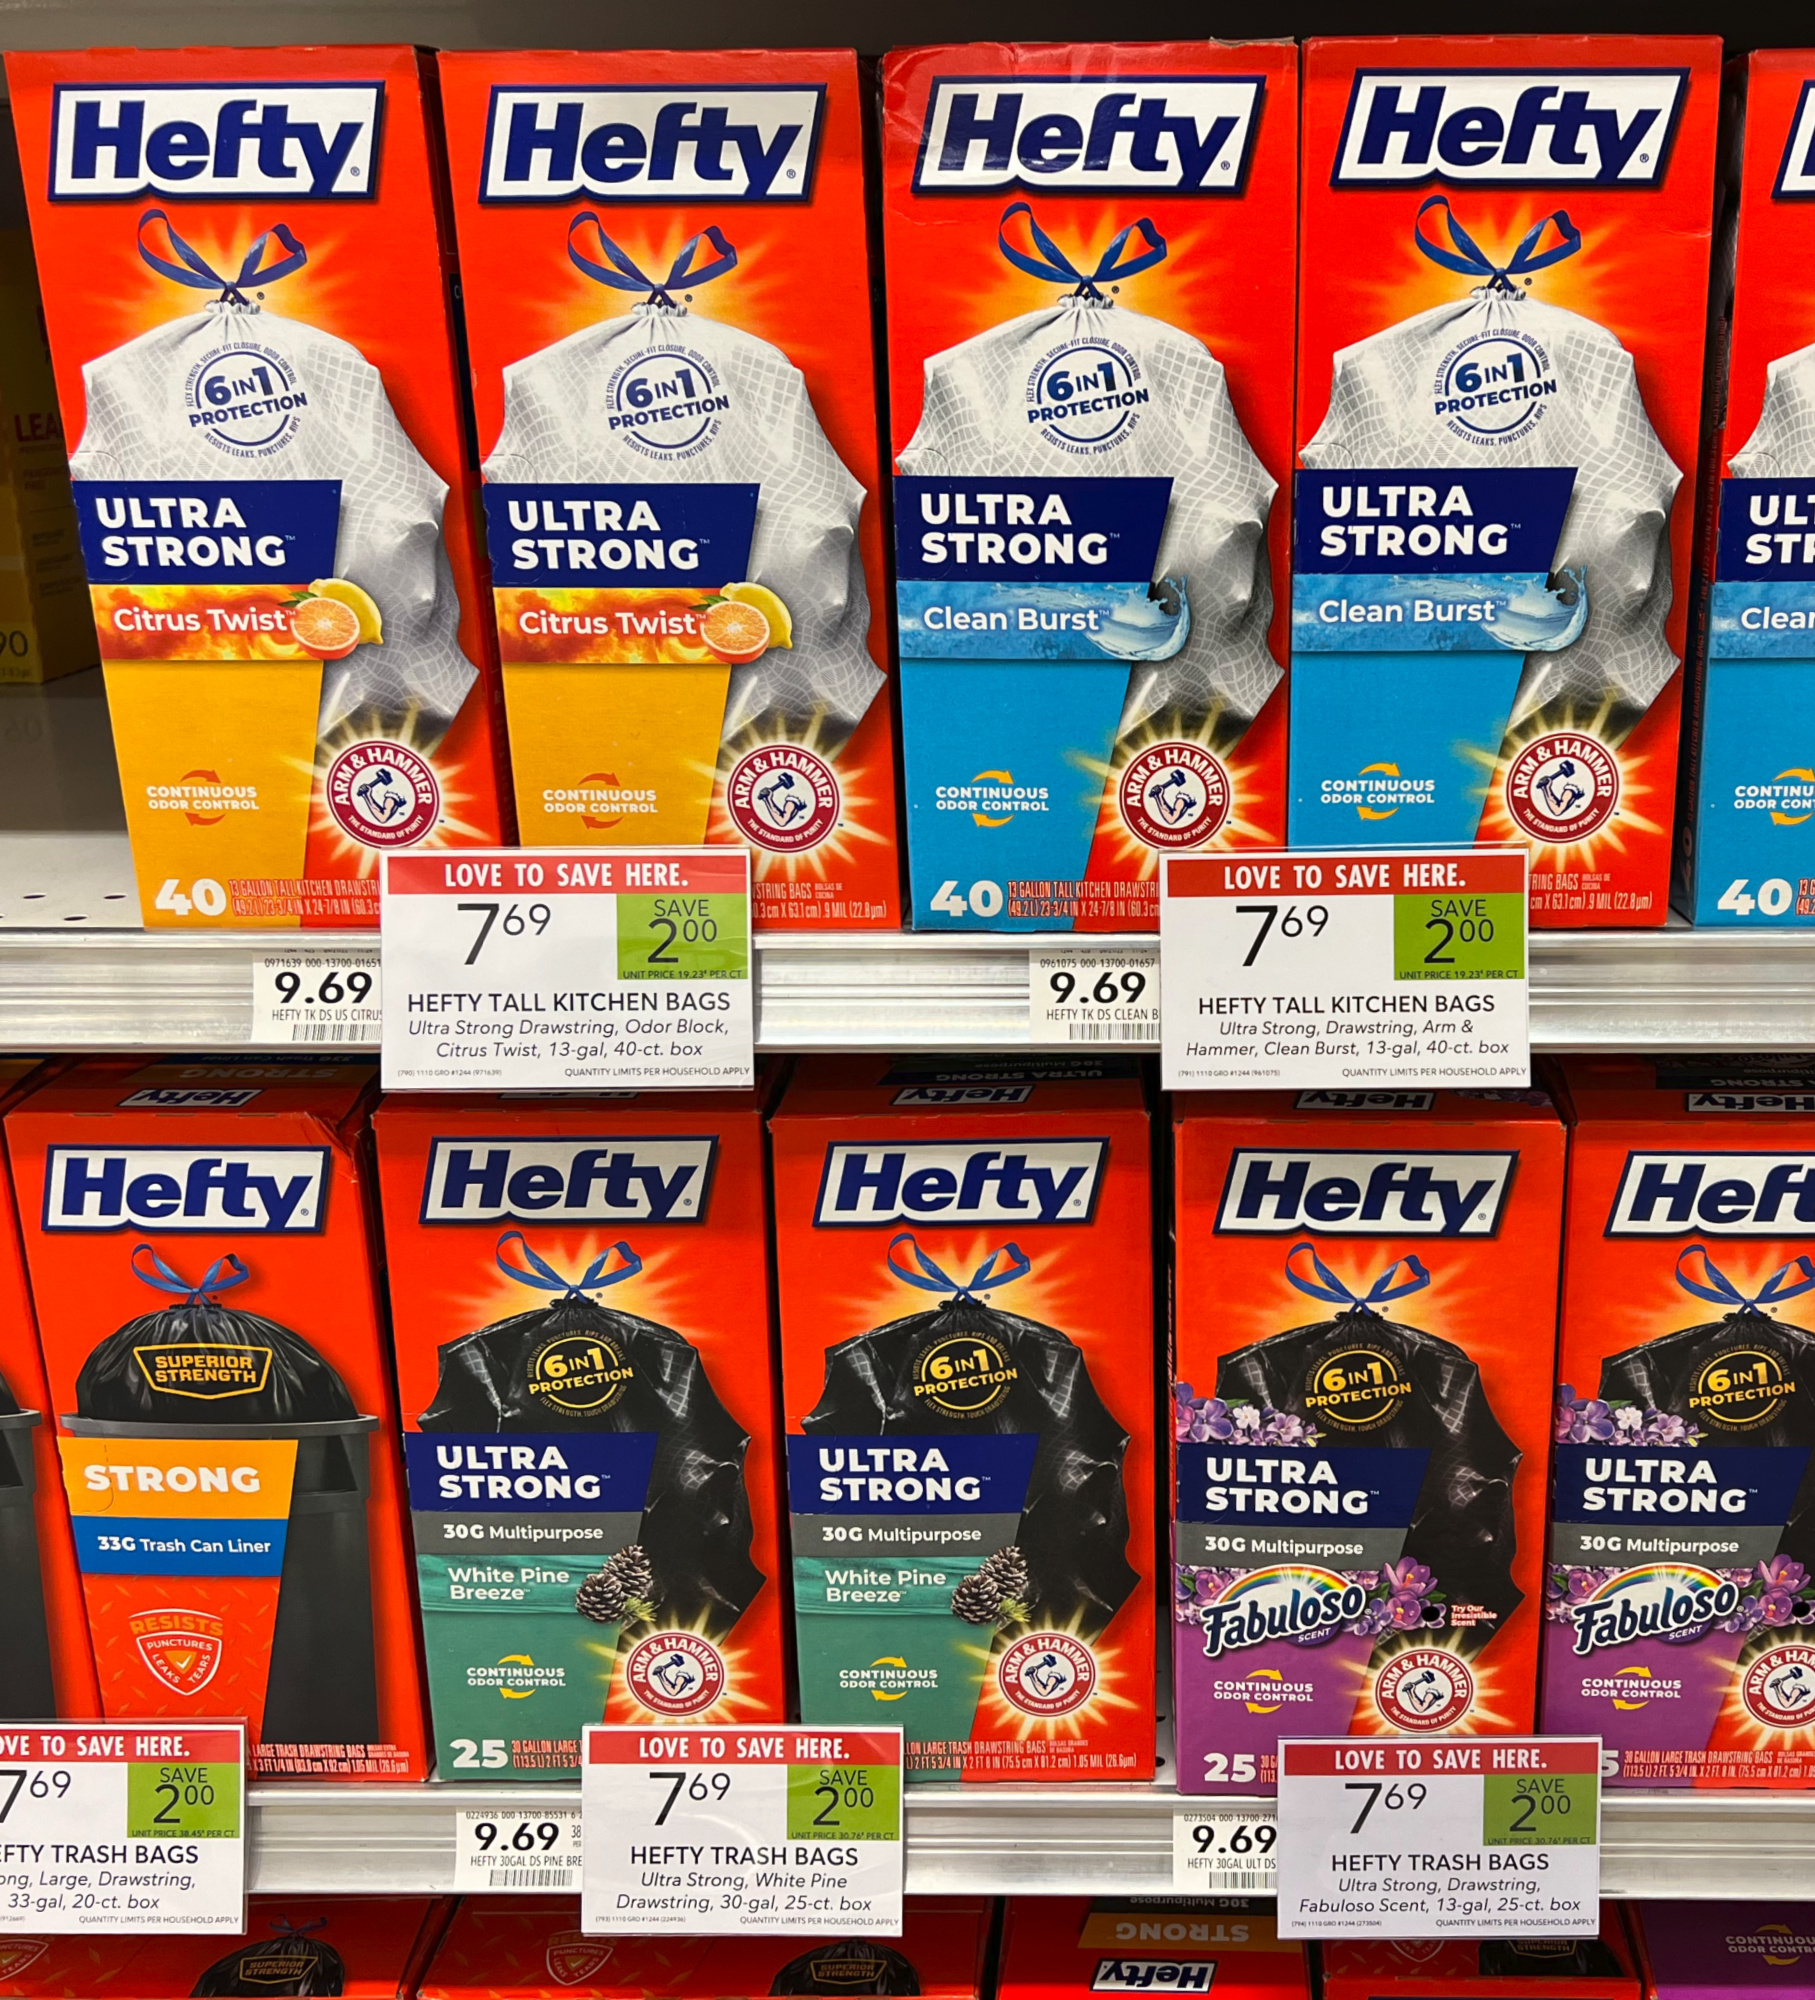 Hefty Trash Bags As Low As 6.69 At Publix Save 3 iHeartPublix